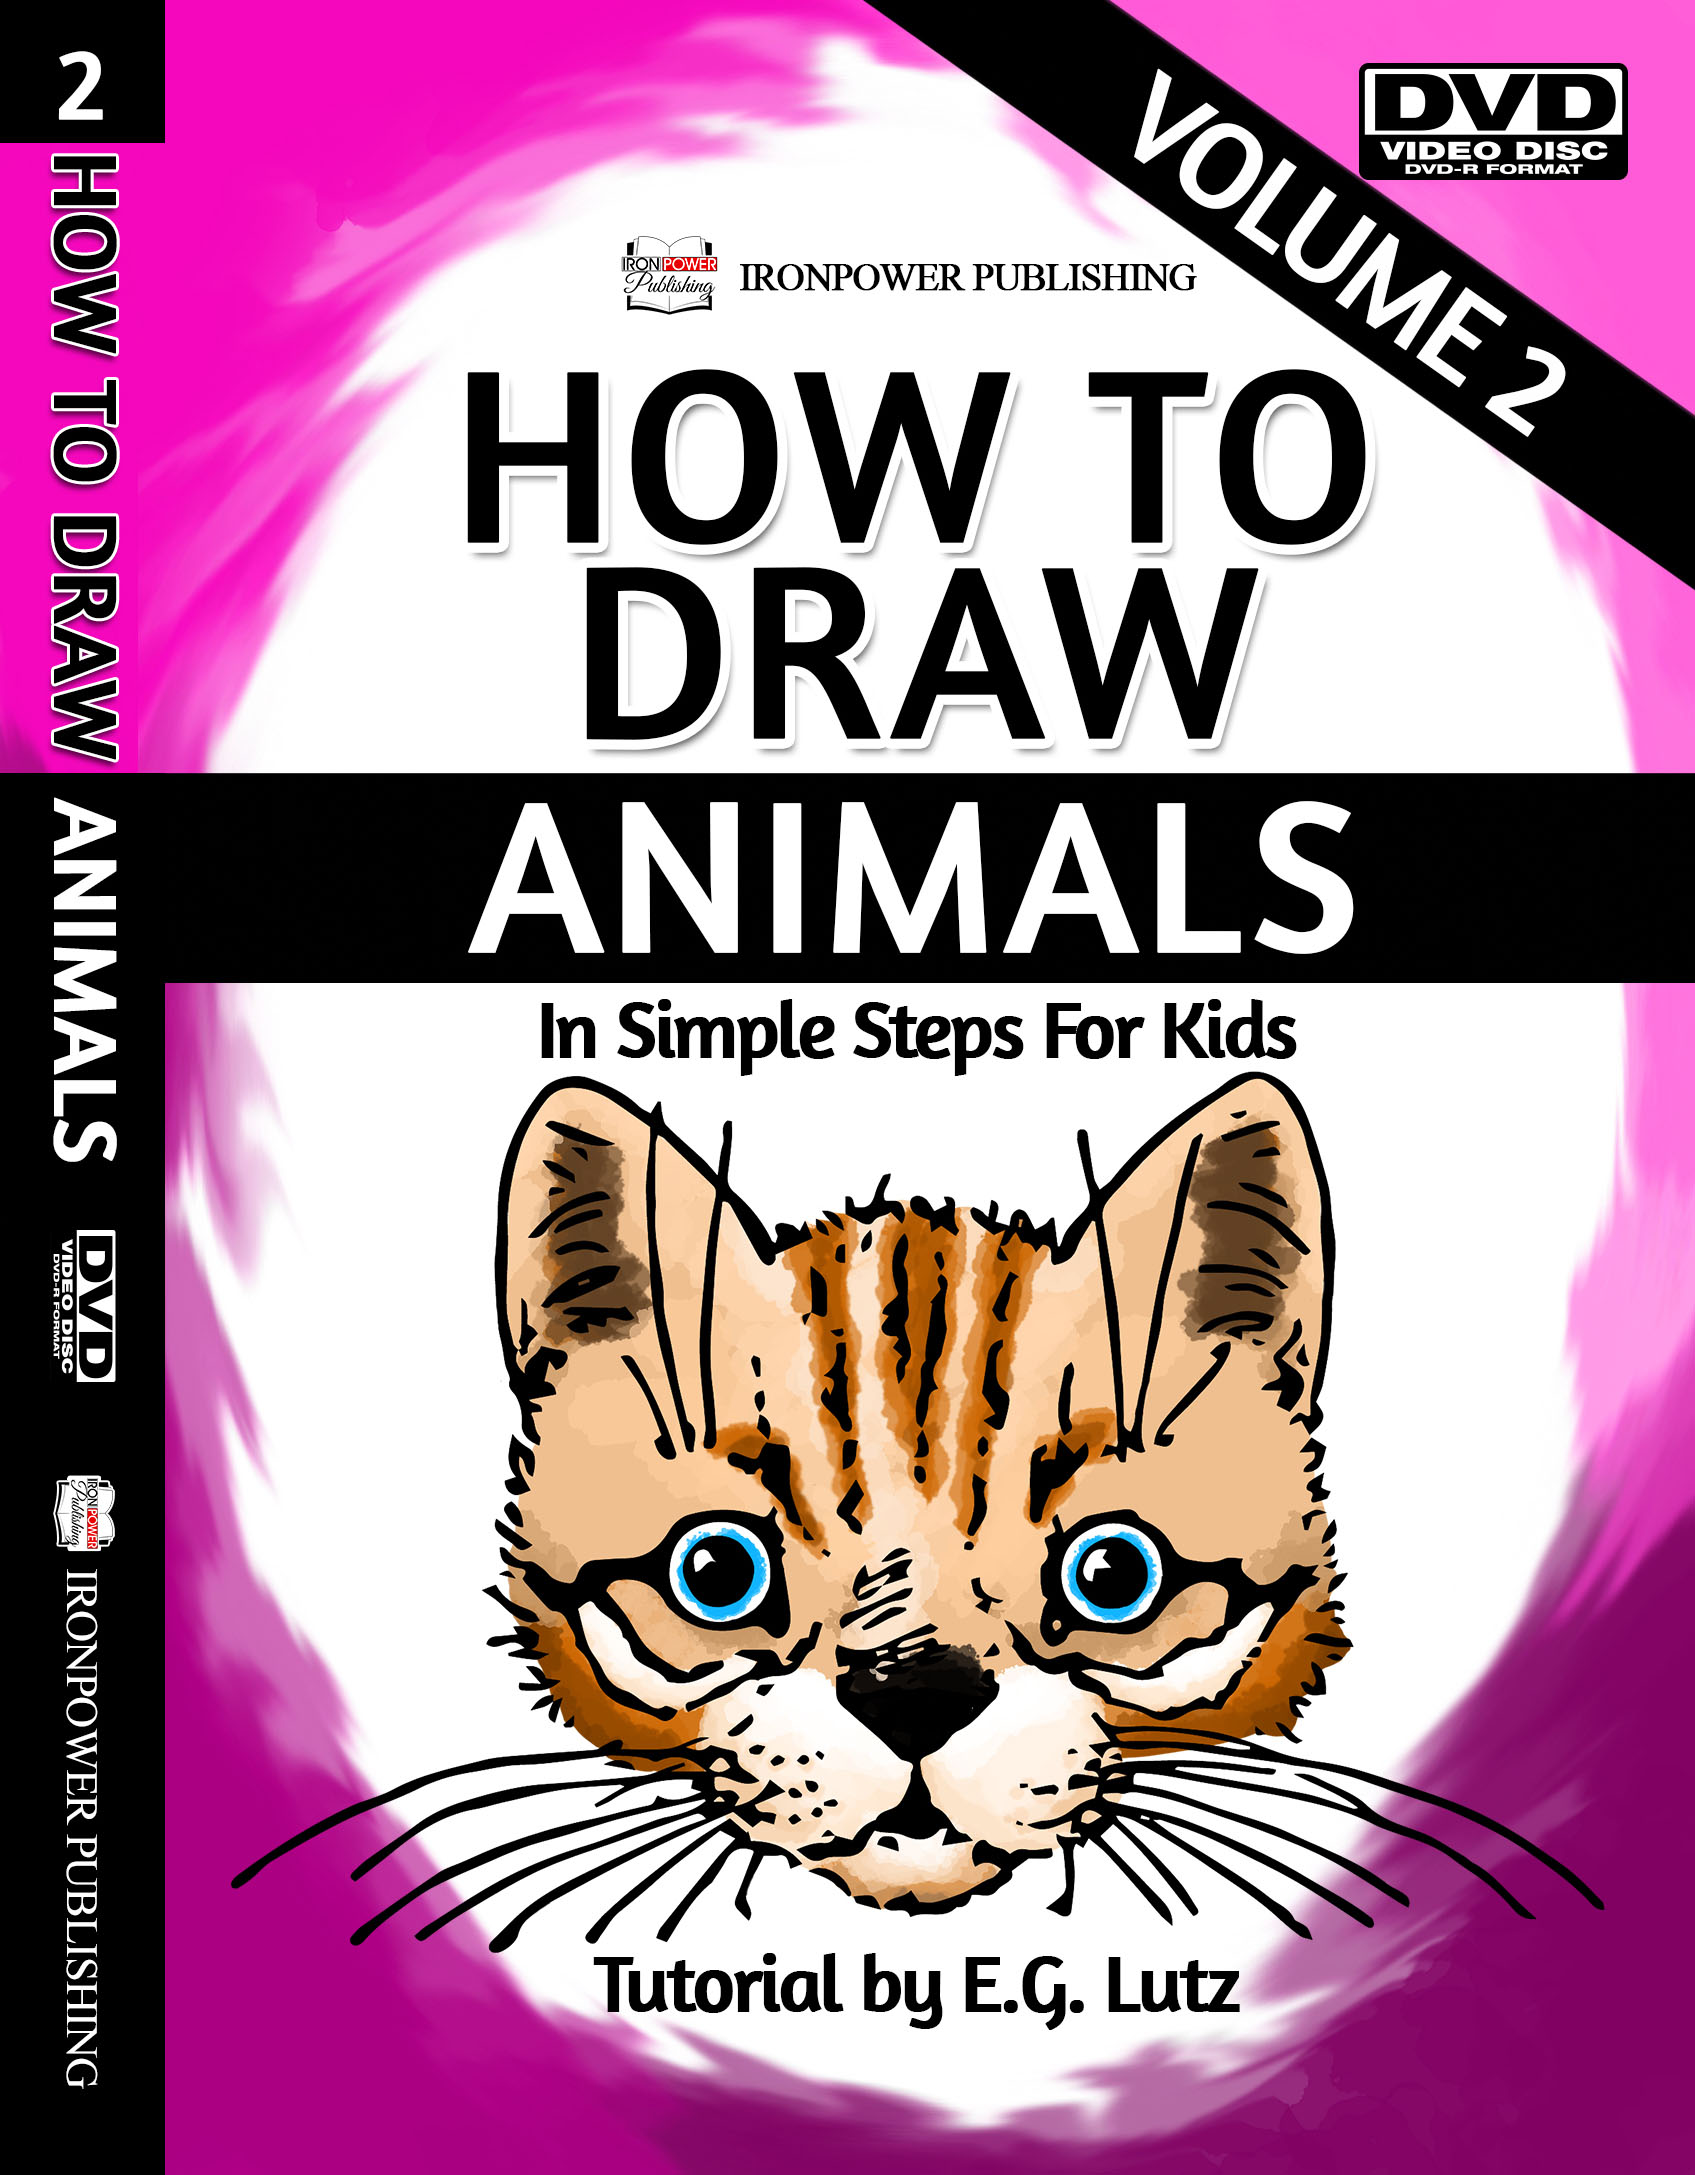 How to Draw Animals (In Simple Steps for Kids) Volume 2 – Ironpower  Publishing